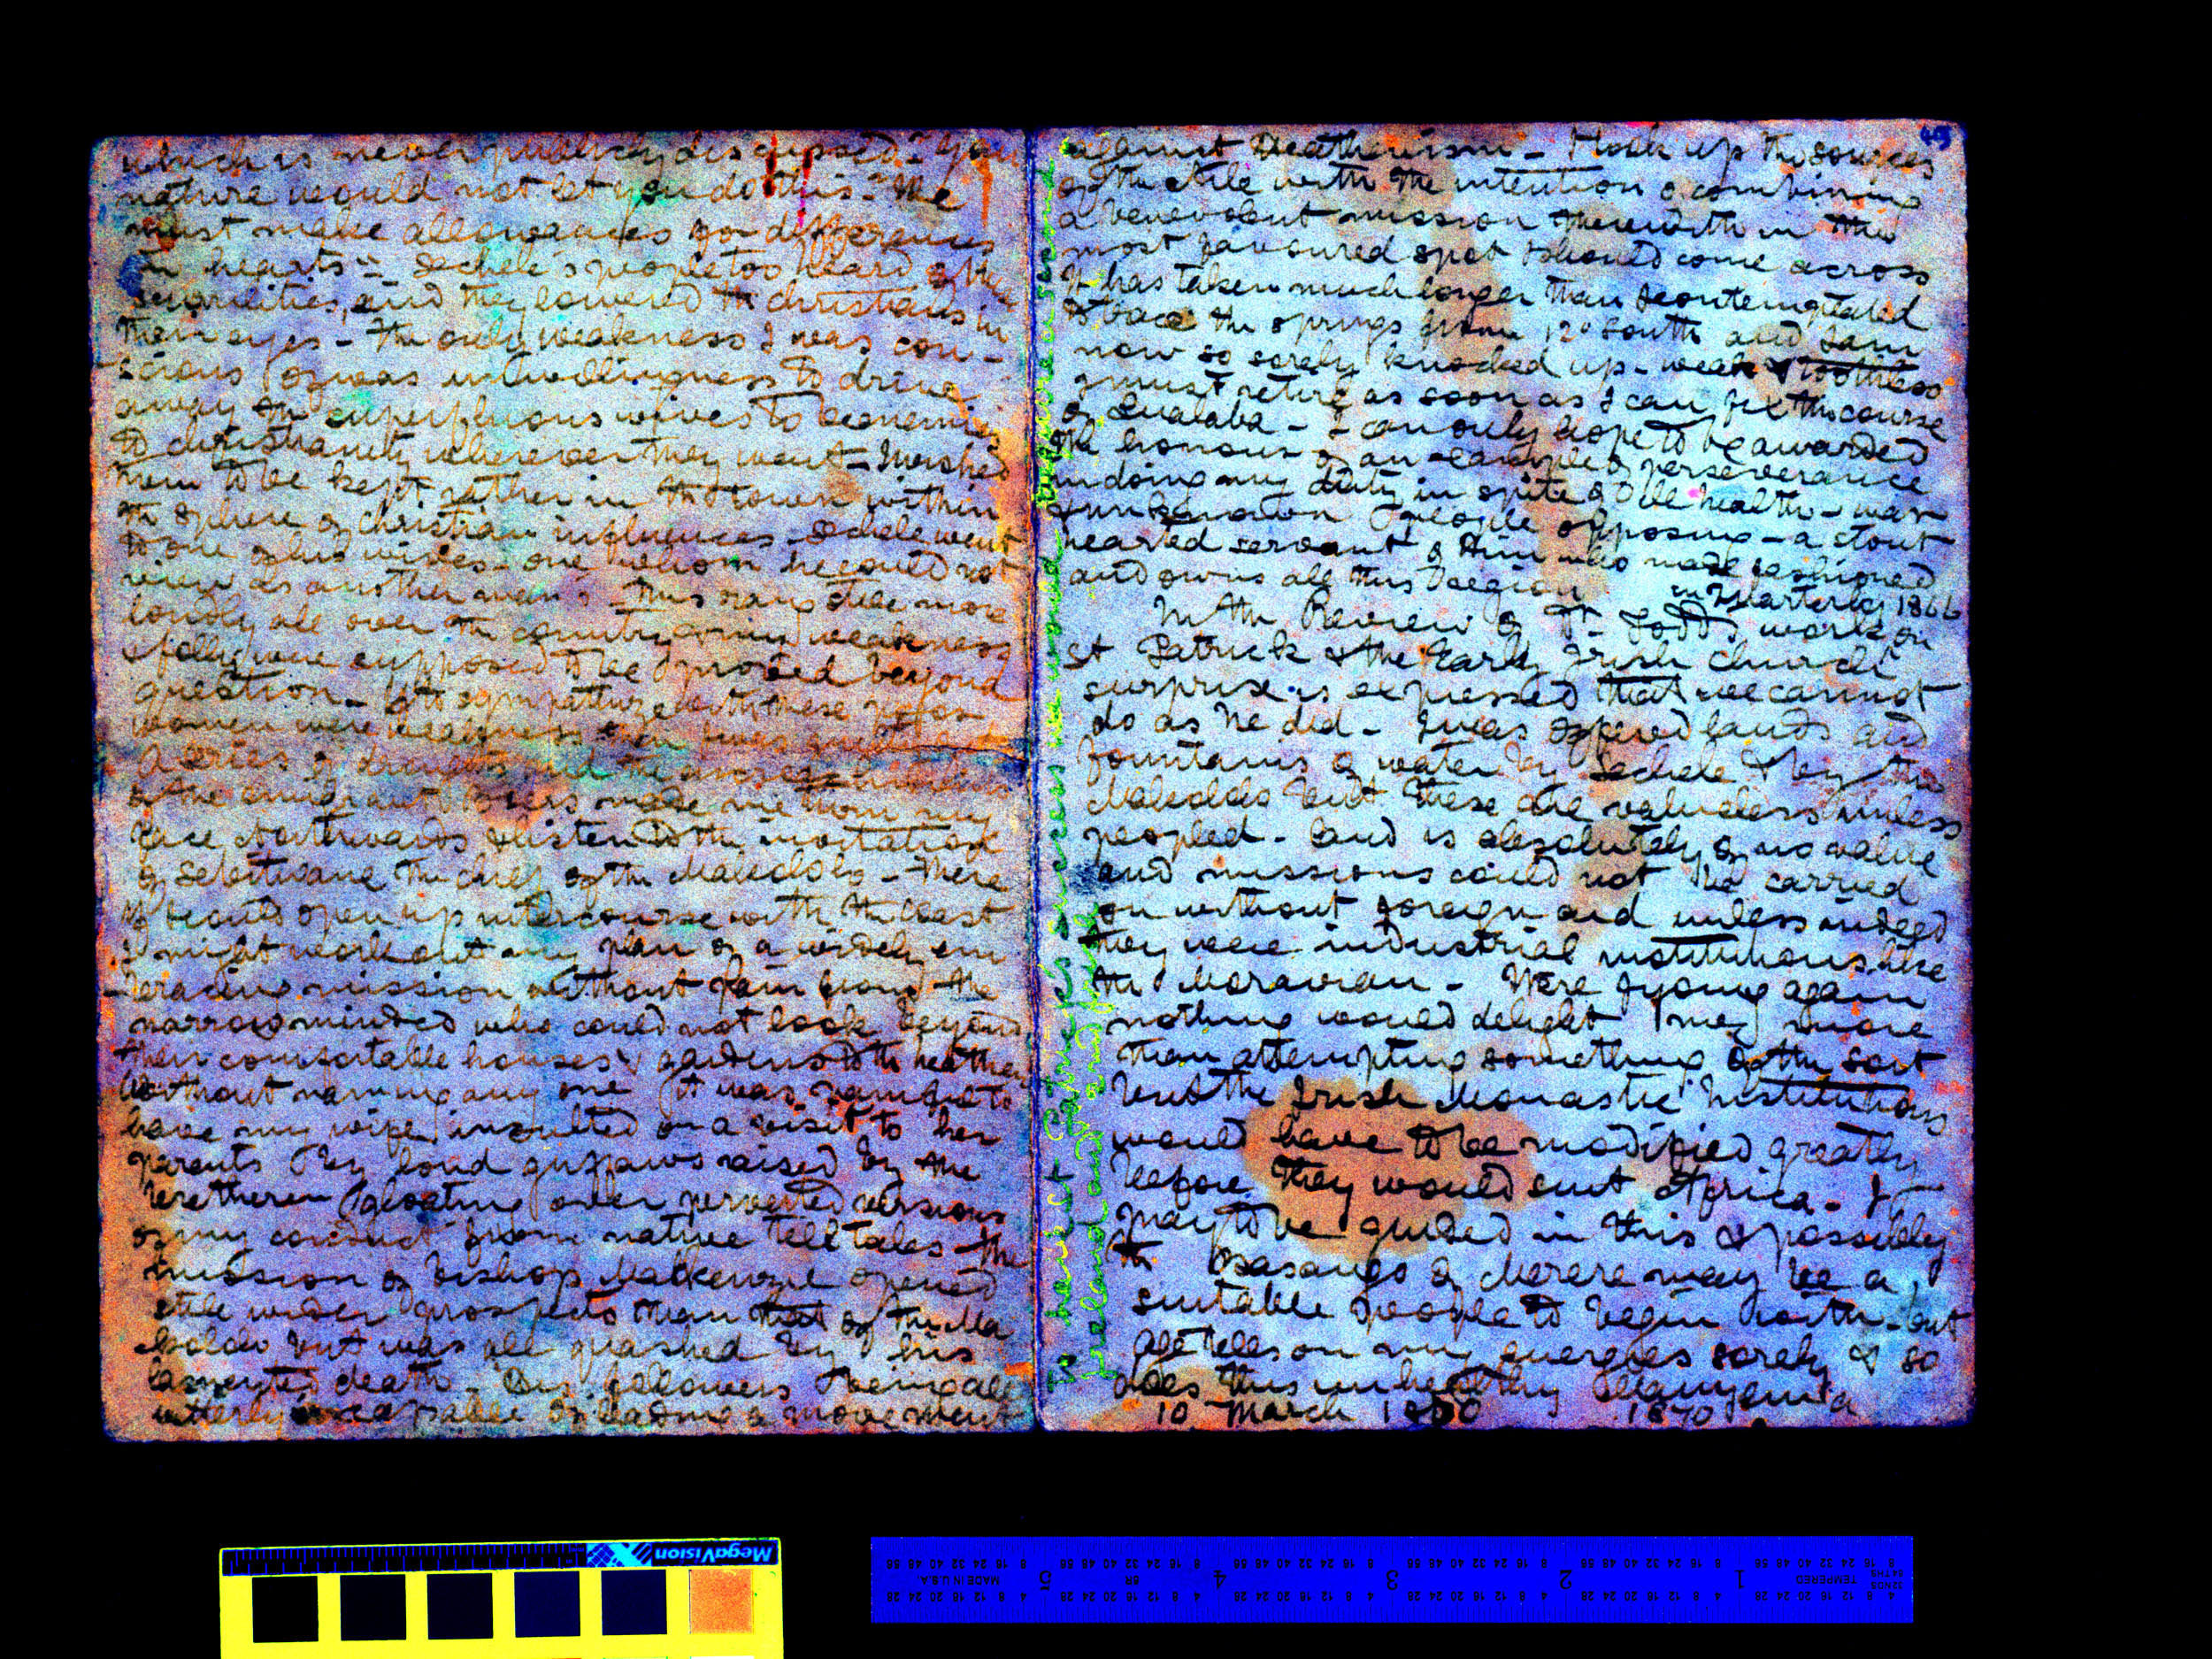 A page from David Livingstone's 1870 Field Diary after spectral image processing to enhance staining. Copyright National Library of Scotland and Dr. Neil Imray Livingstone Wilson (as relevant). Creative Commons Attribution-NonCommercial 3.0 Unported (https://creativecommons.org/licenses/by-nc/3.0/)